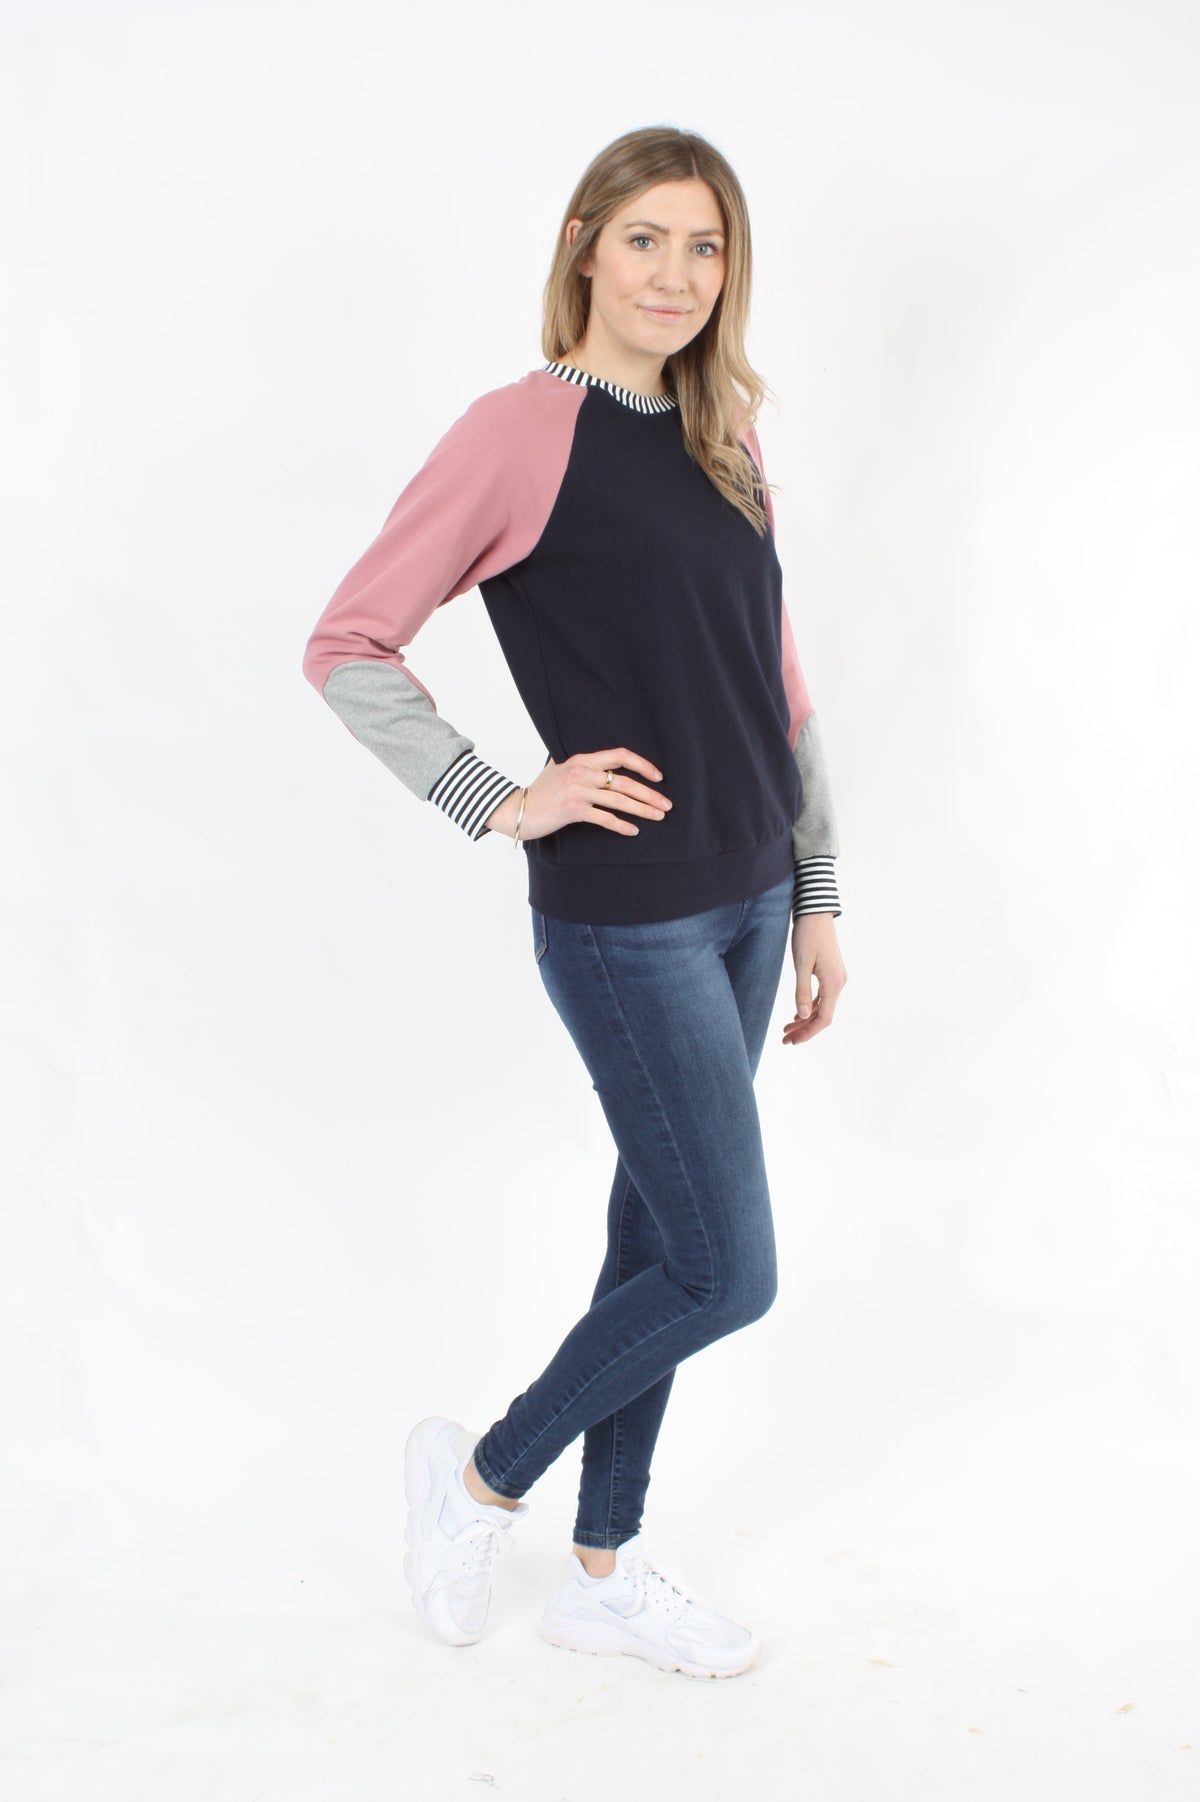 Shazza Top - Navy and Rose - Pre Order